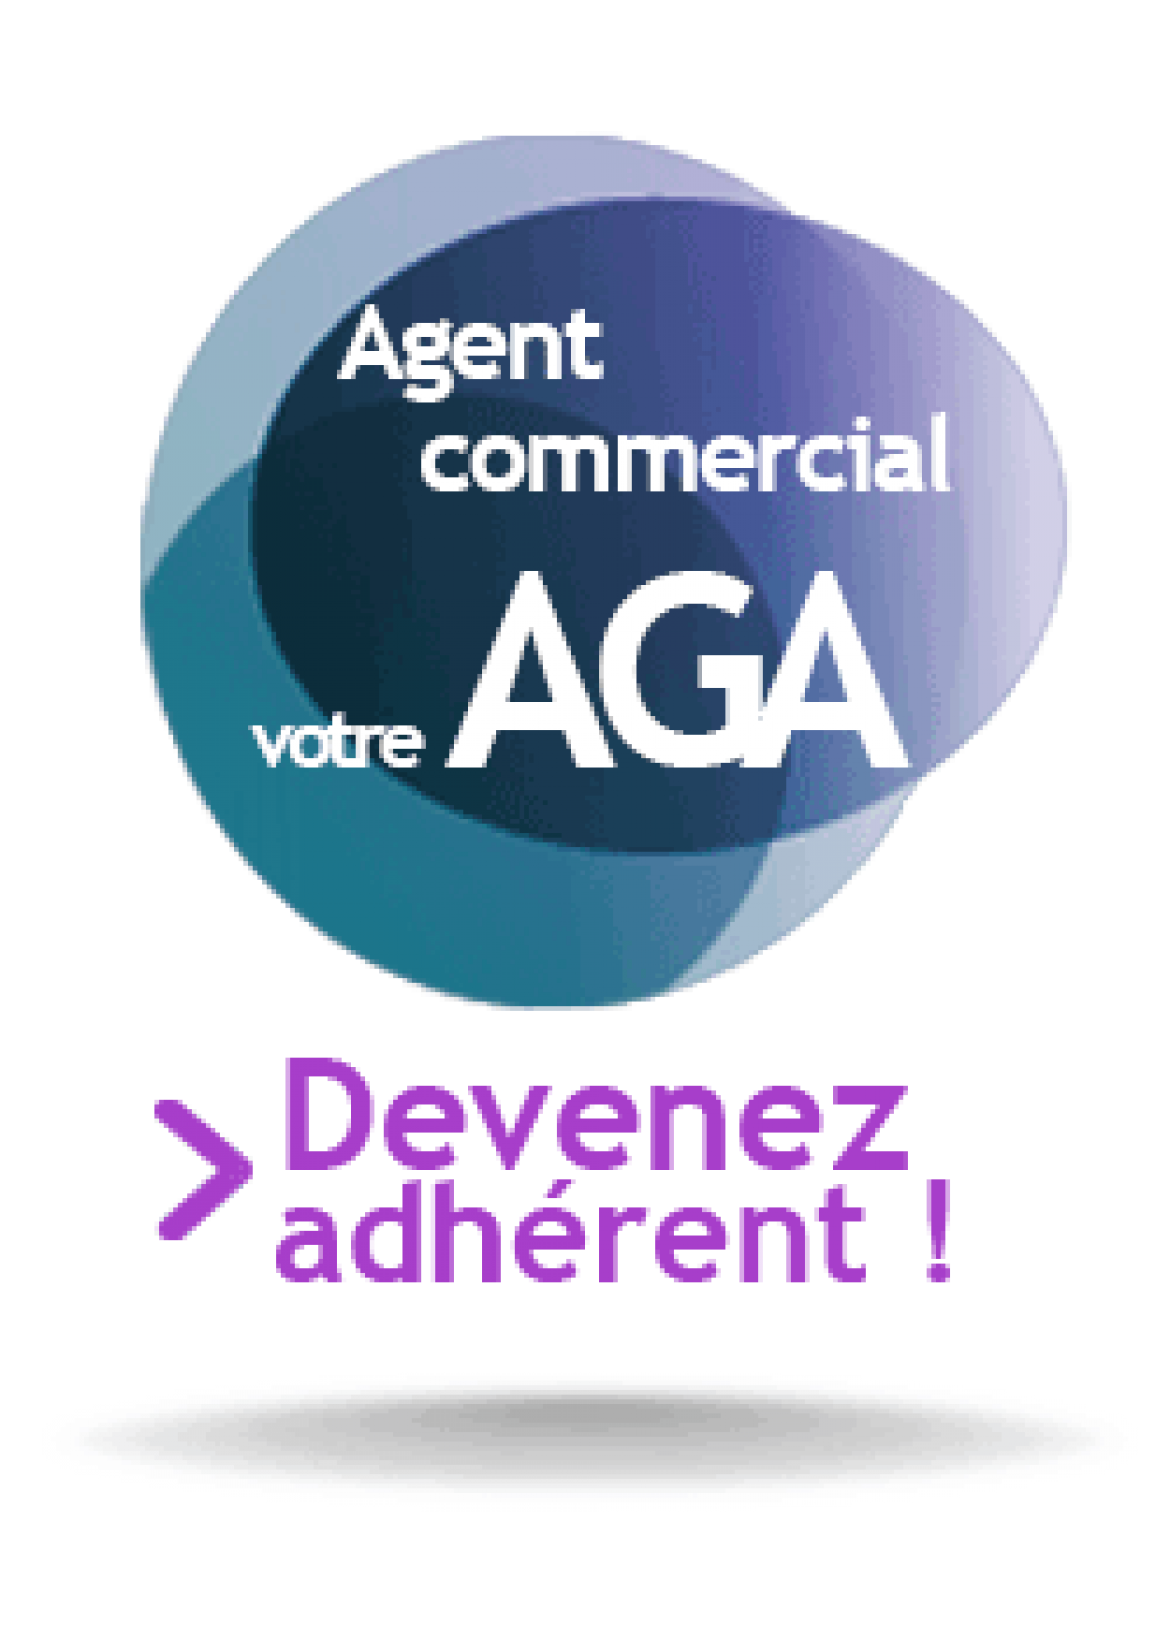 AGA Agent commercial